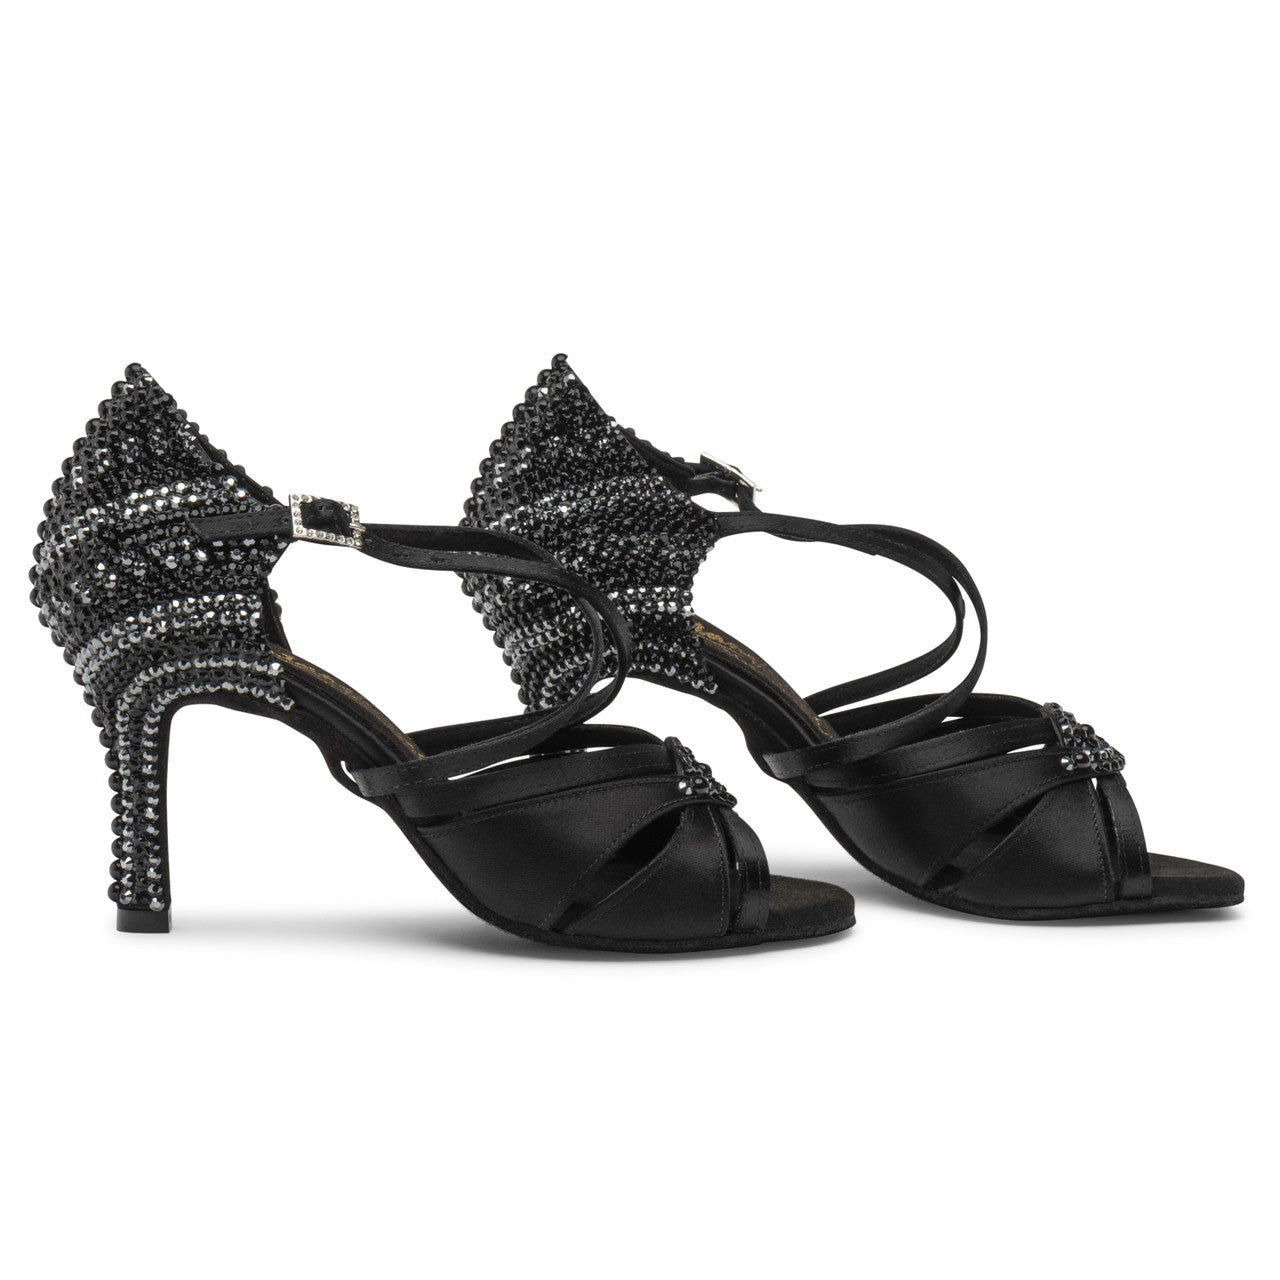 International Dance Shoes IDS Black Satin Mia by Lauren Latin Shoe Covered in Jet Preciosa Crystals